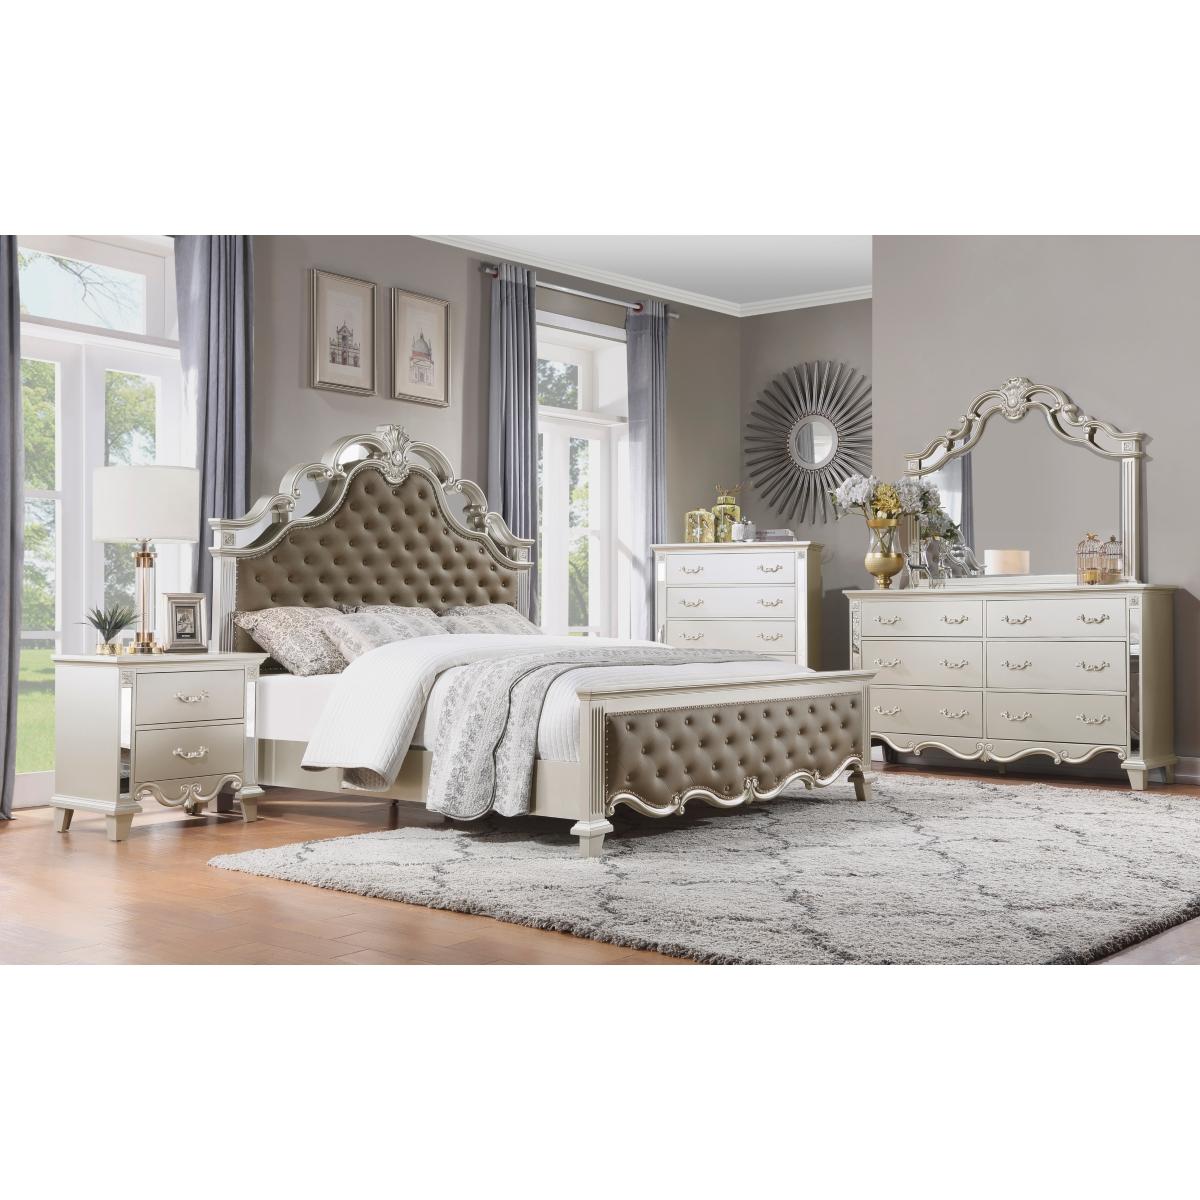 Traditional Bedroom Set 1429-1*6PC Ever 1429-1*6PC in Champagne Faux Leather